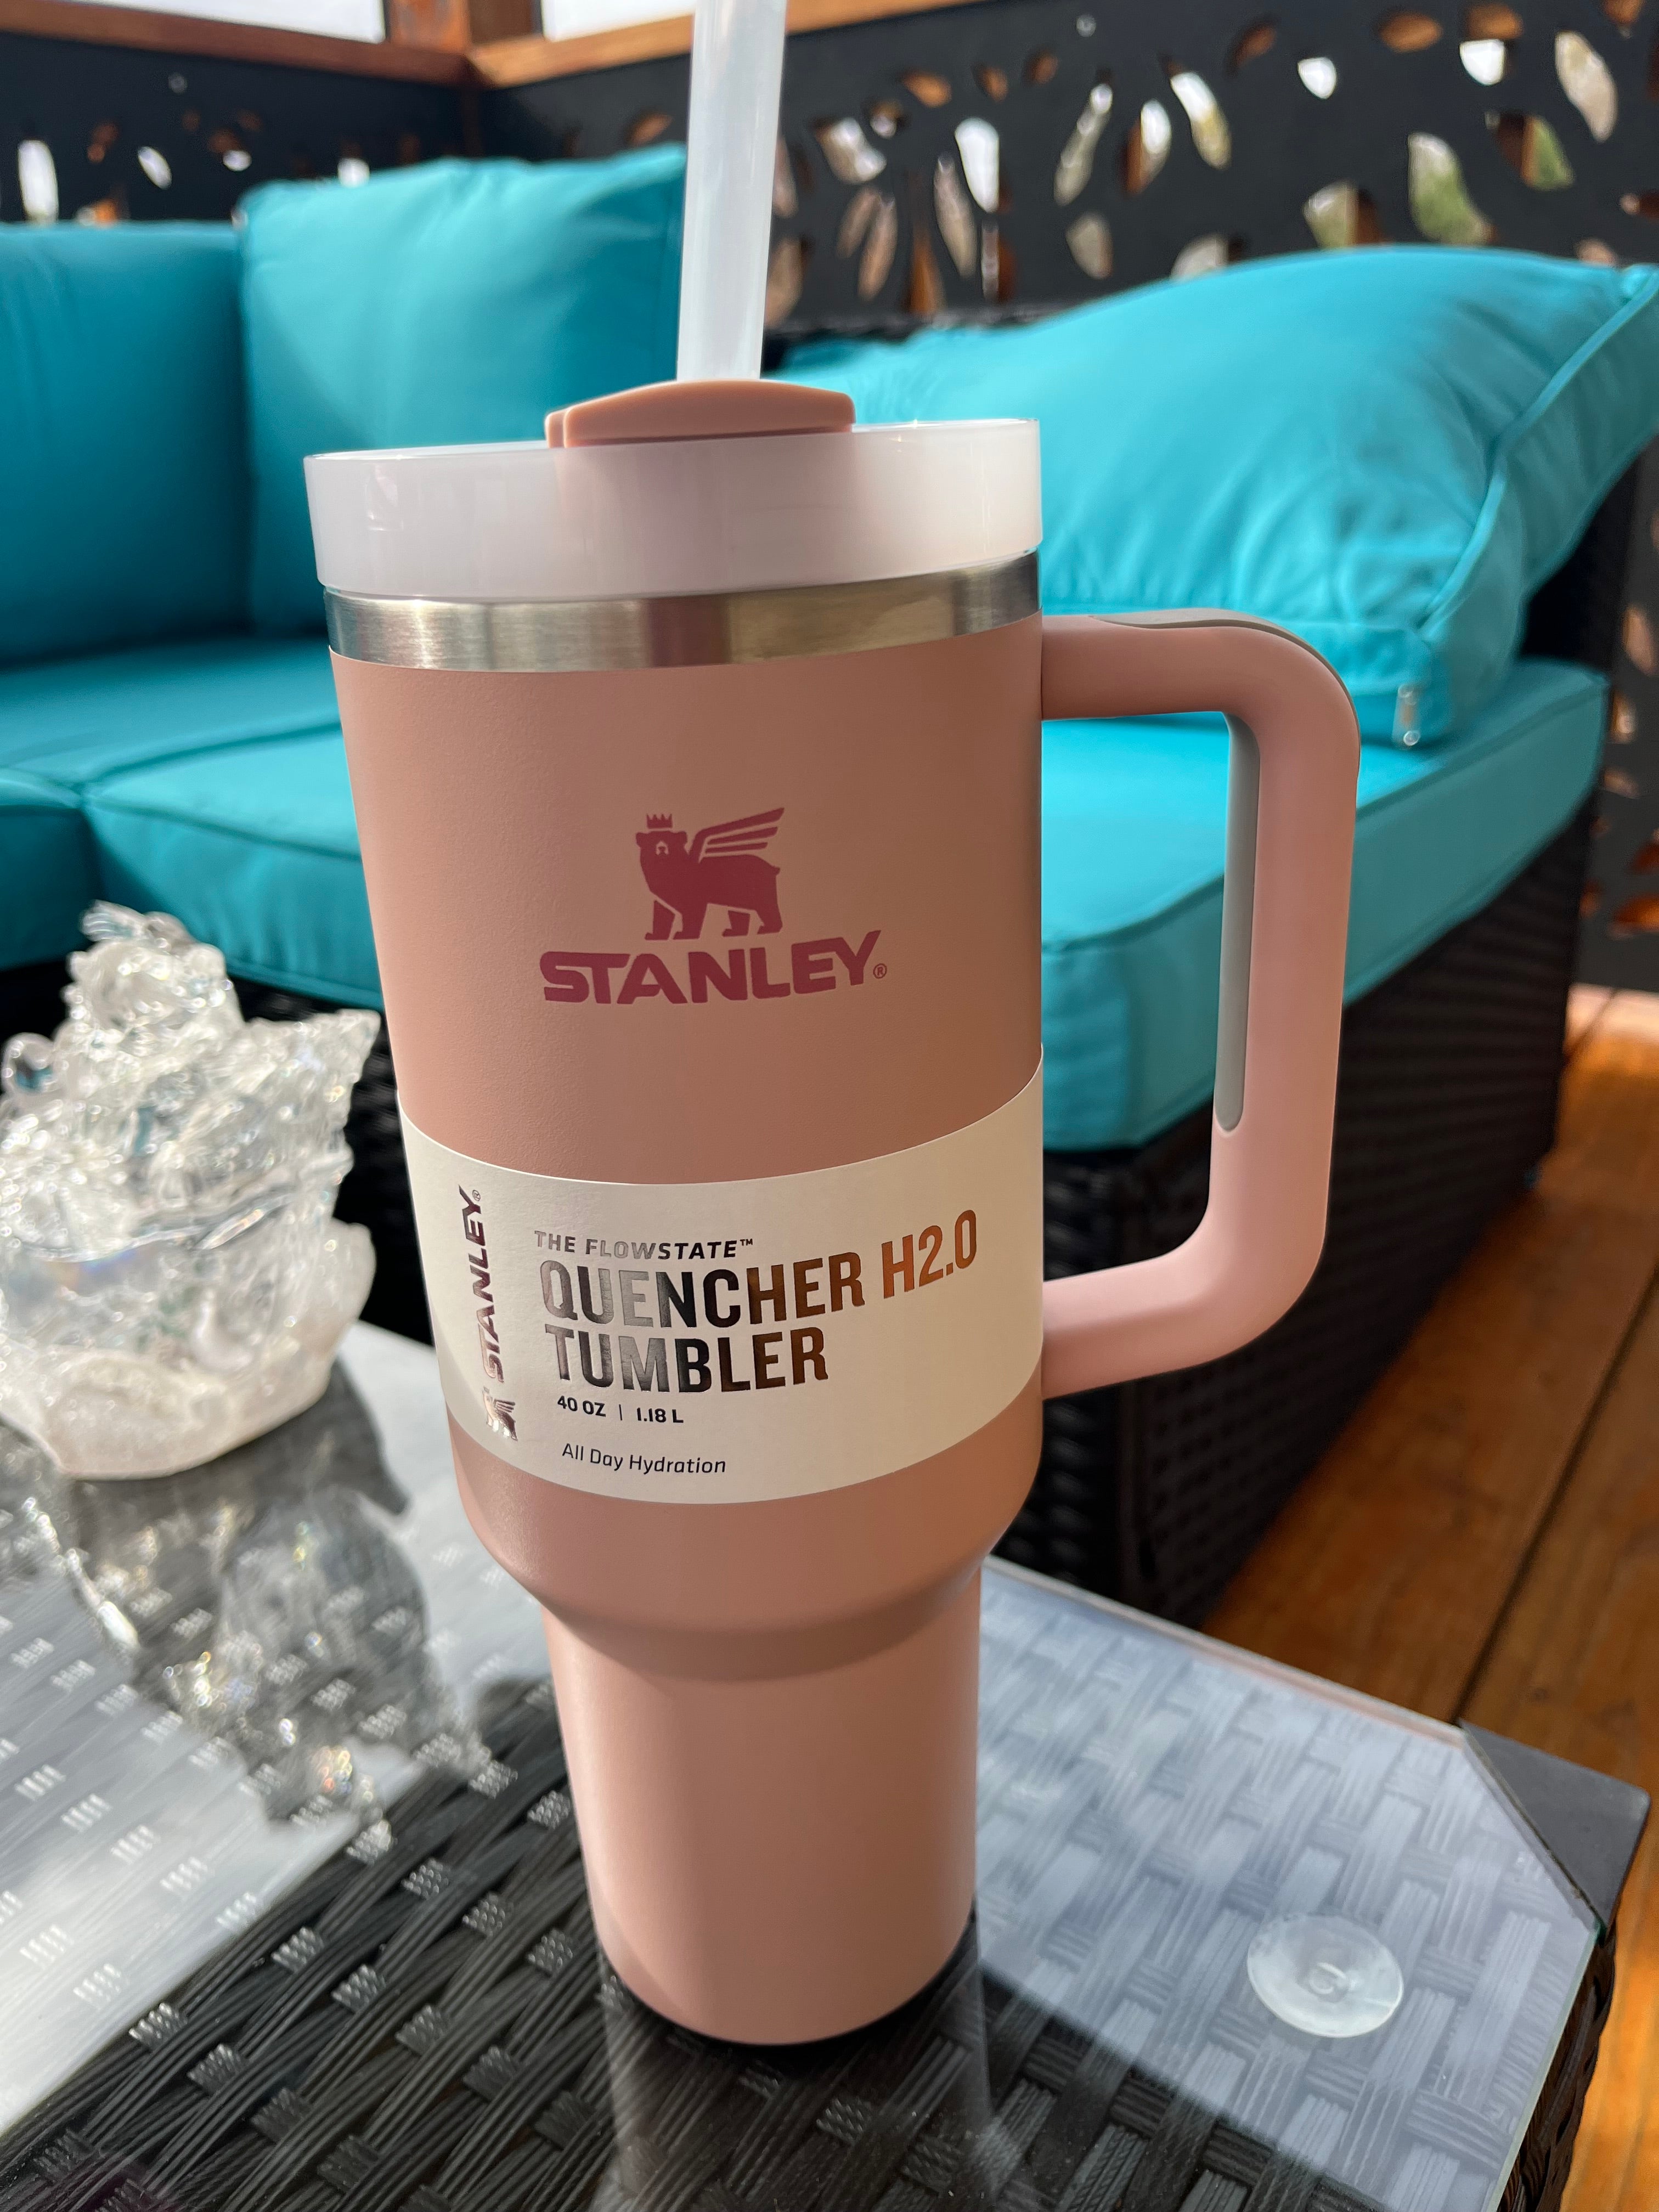 USA AUTHENTIC Stanley 30 oz. Quencher H2.0 FlowState Tumbler- PINK DUSK  SOLD OUT